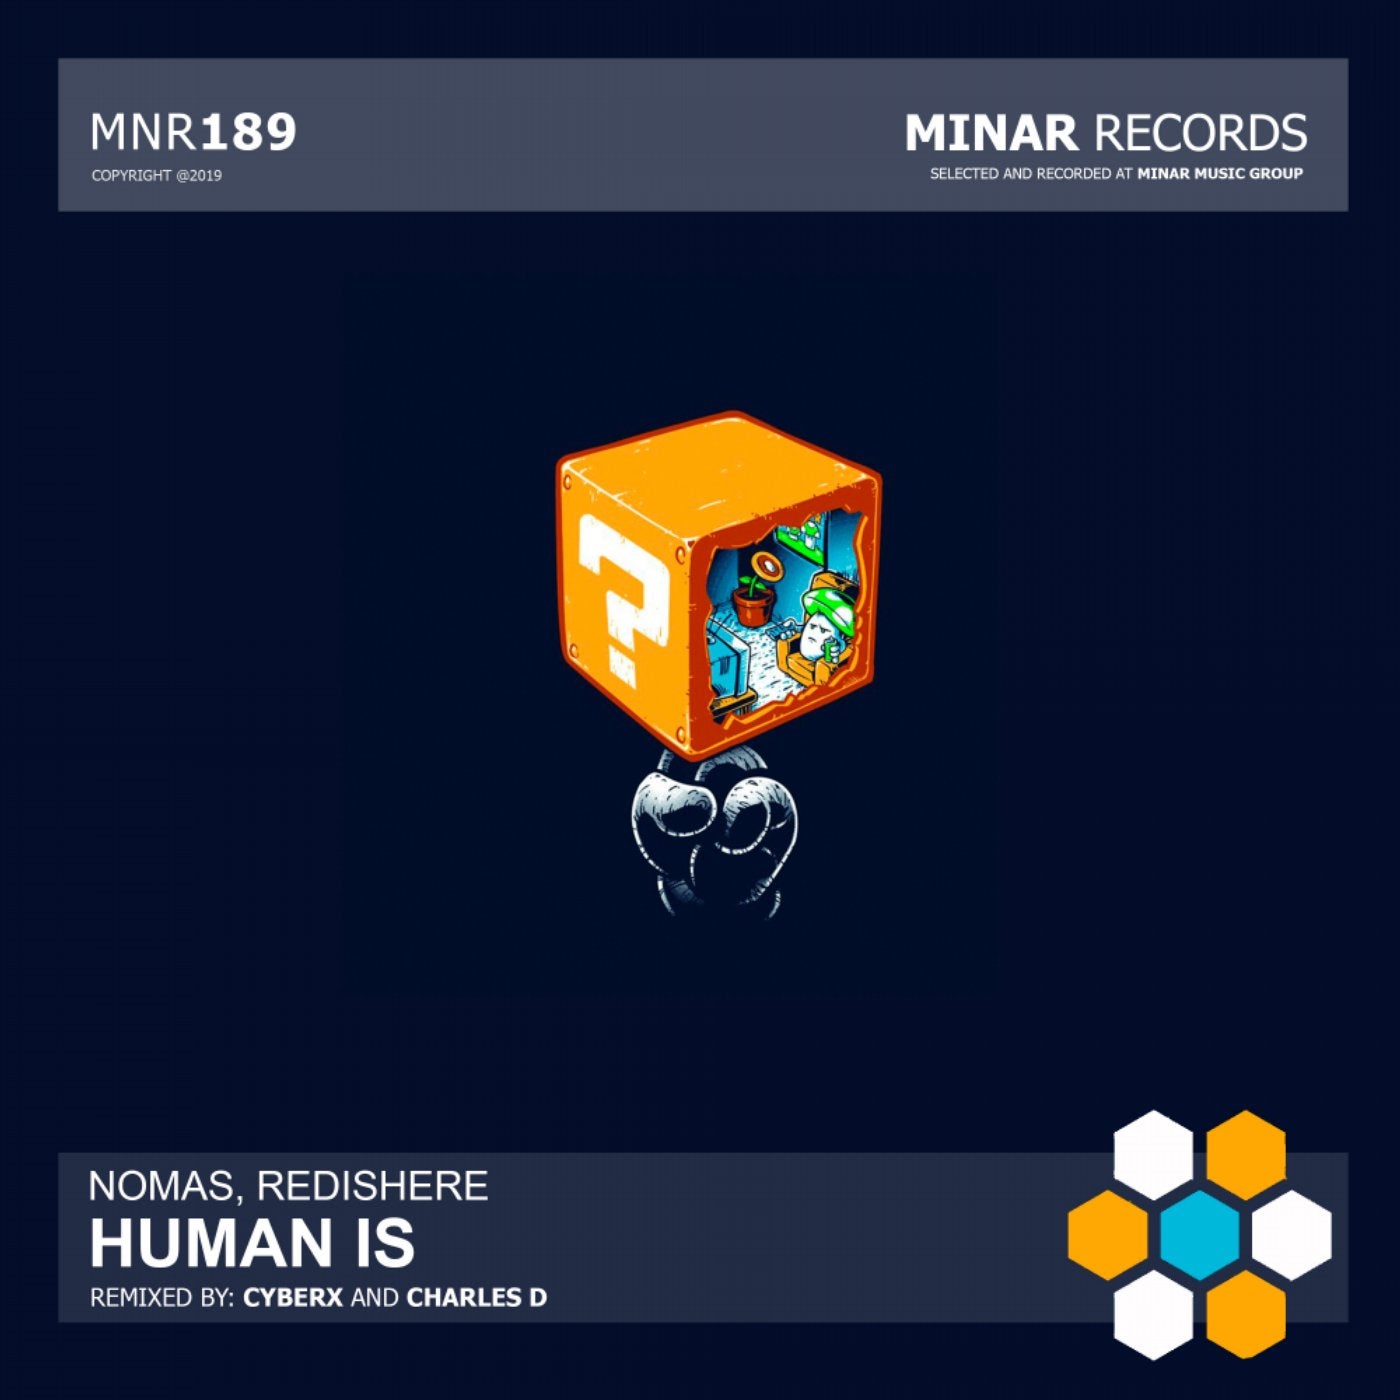 Human Is